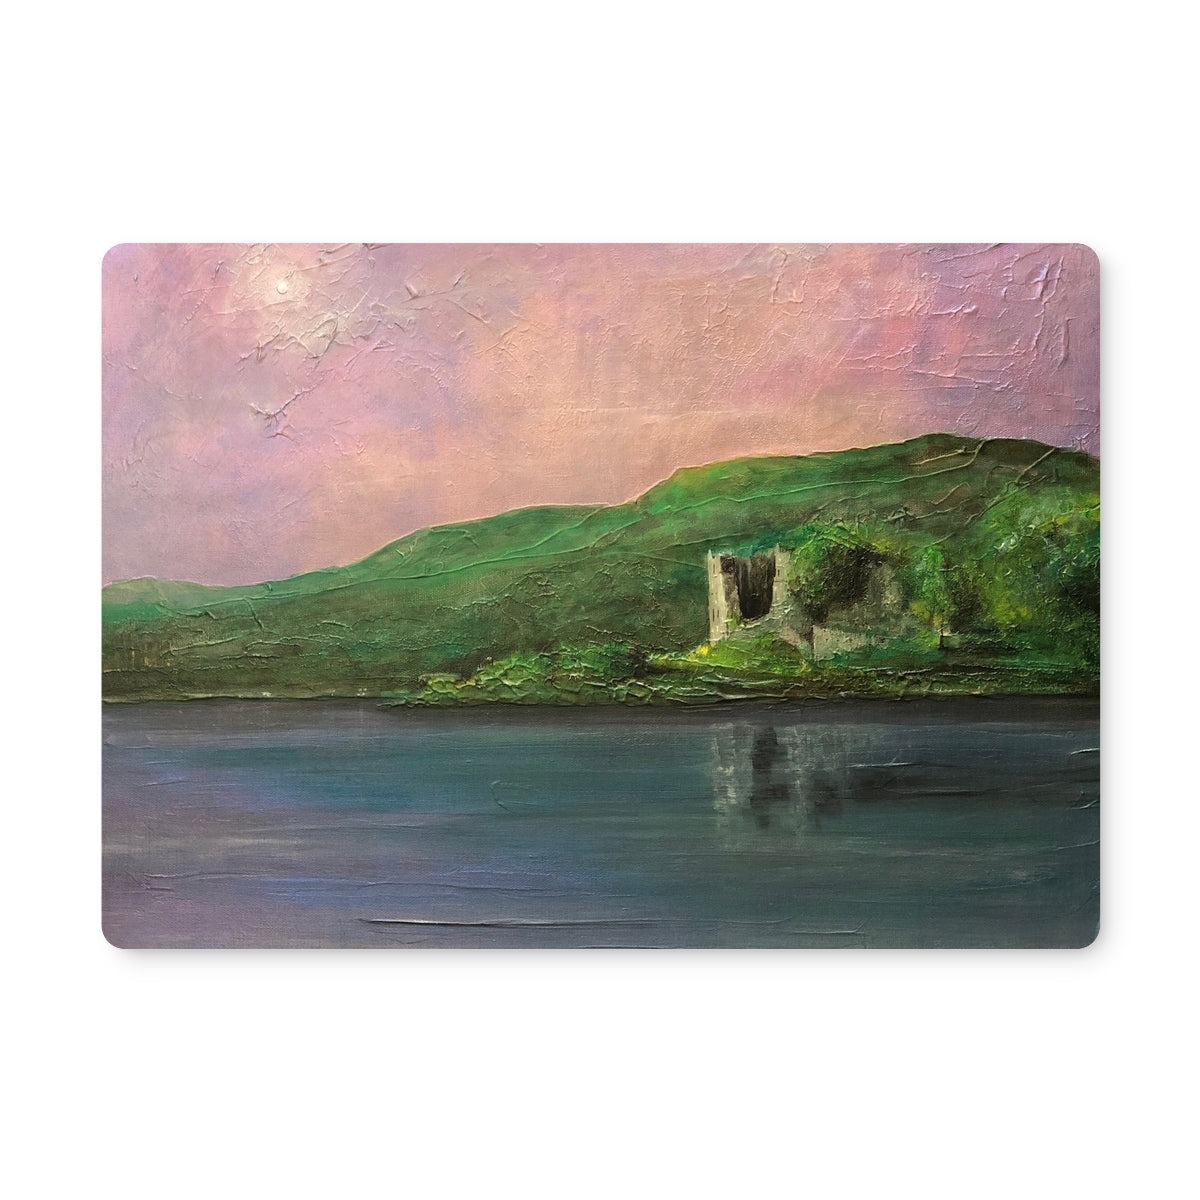 Old Castle Lachlan Art Gifts Placemat-Homeware-Prodigi-4 Placemats-Paintings, Prints, Homeware, Art Gifts From Scotland By Scottish Artist Kevin Hunter